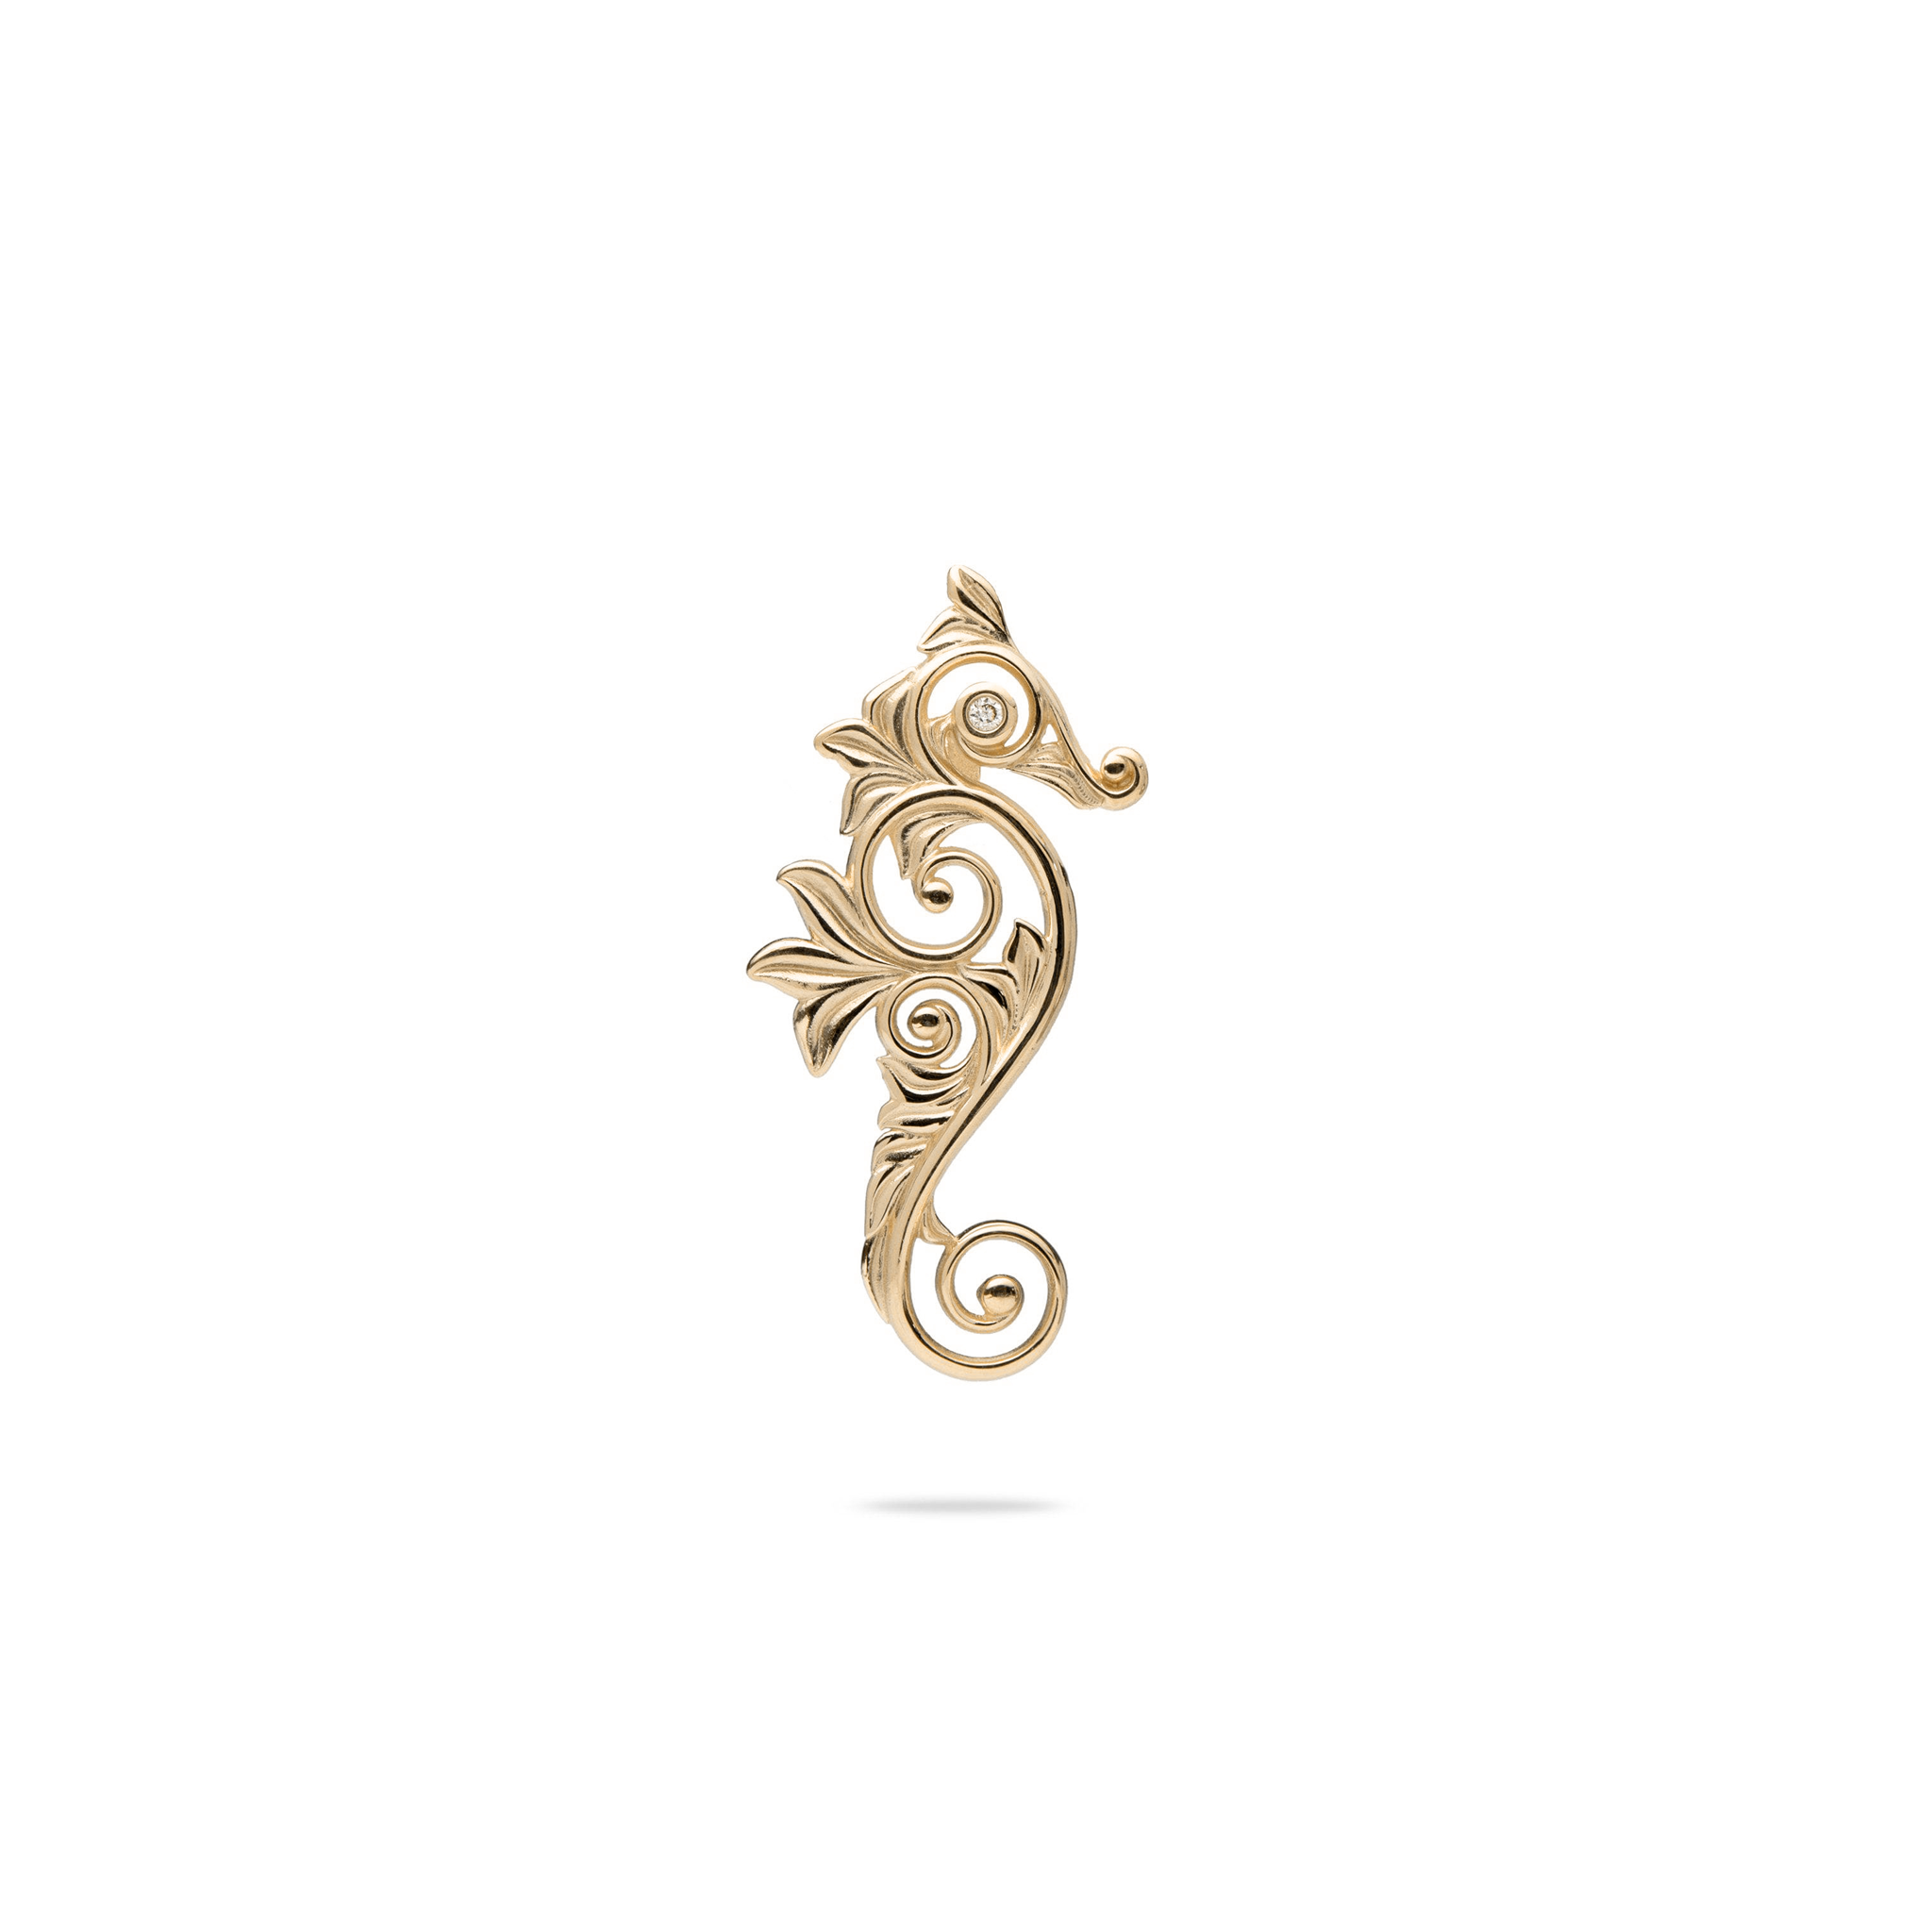 Living Heirloom Seahorse Pendant in Gold with Diamonds - 25mm